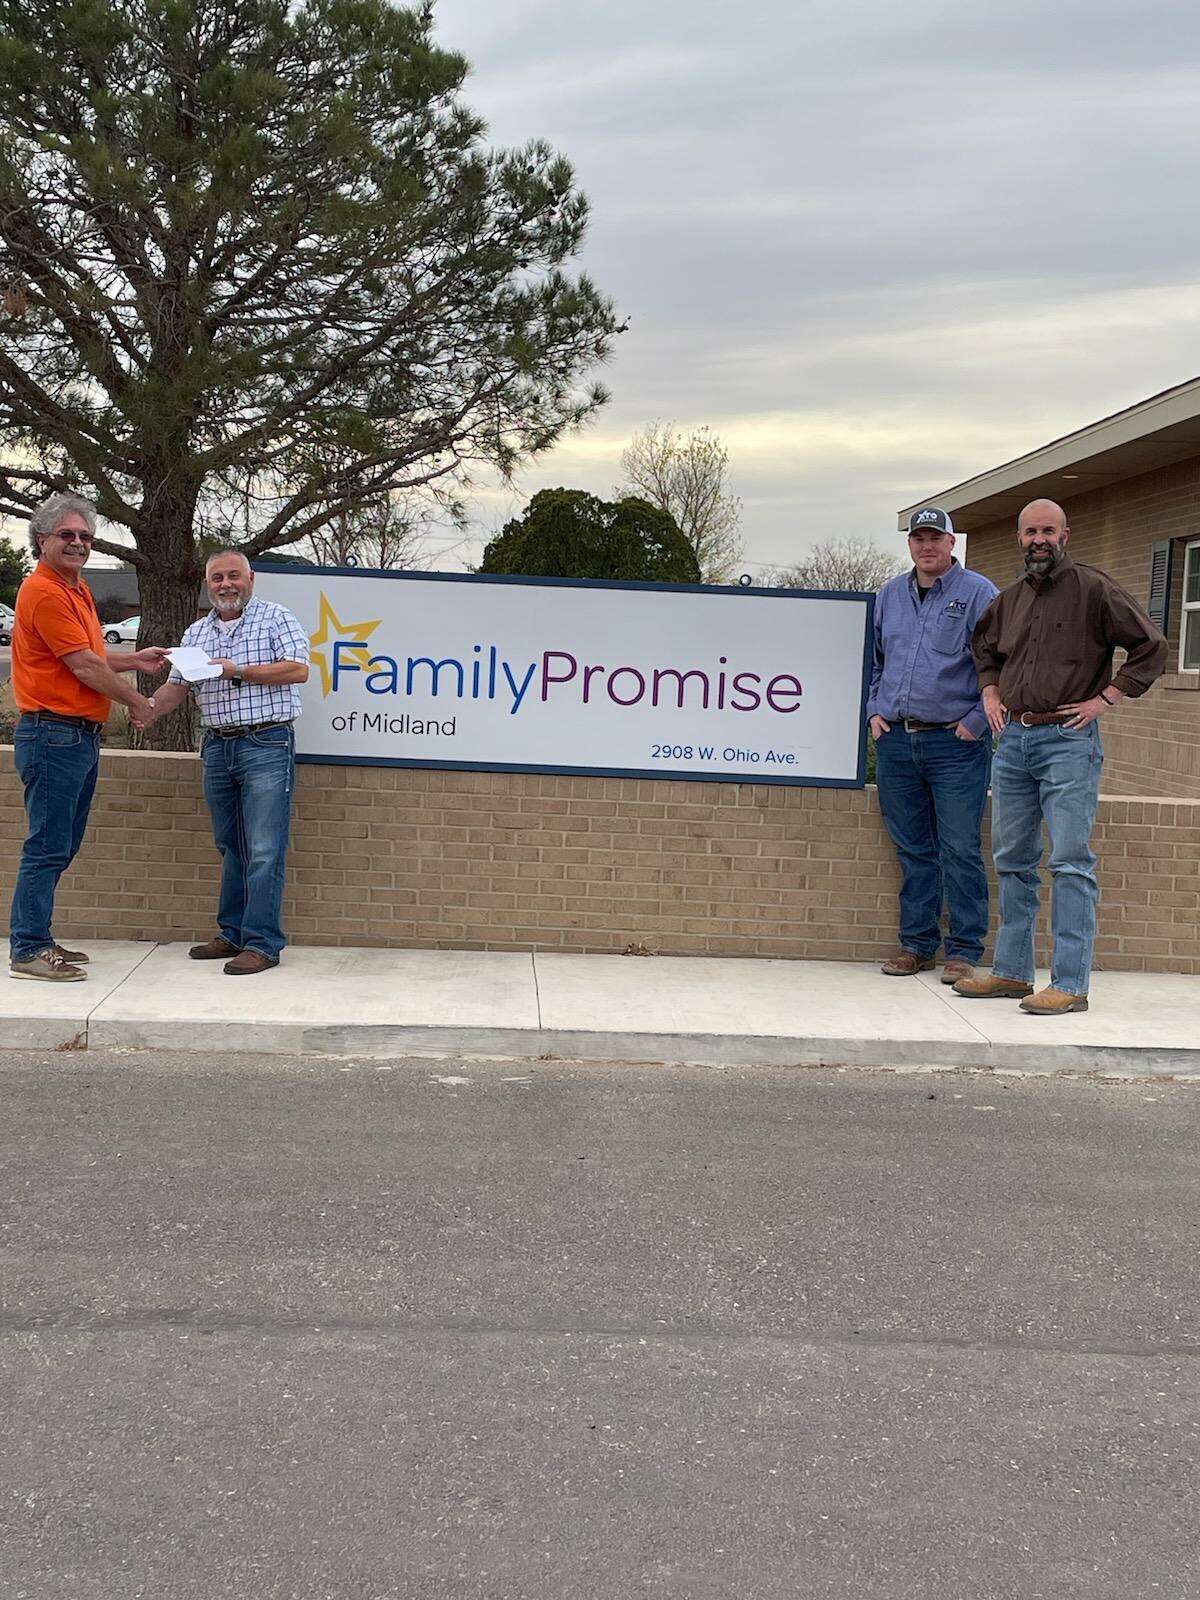 XTO employees present Family Promise of Midland $1,000 from their “No Shave November” fundraising event.  XTO has been a strong supporter of Family Promise for years. In the picture, from left to right, Tom Miller, executive director of Family Promise of Midland, Doyle Lawson, Dustin Rose and Brian Givens XTO employees.